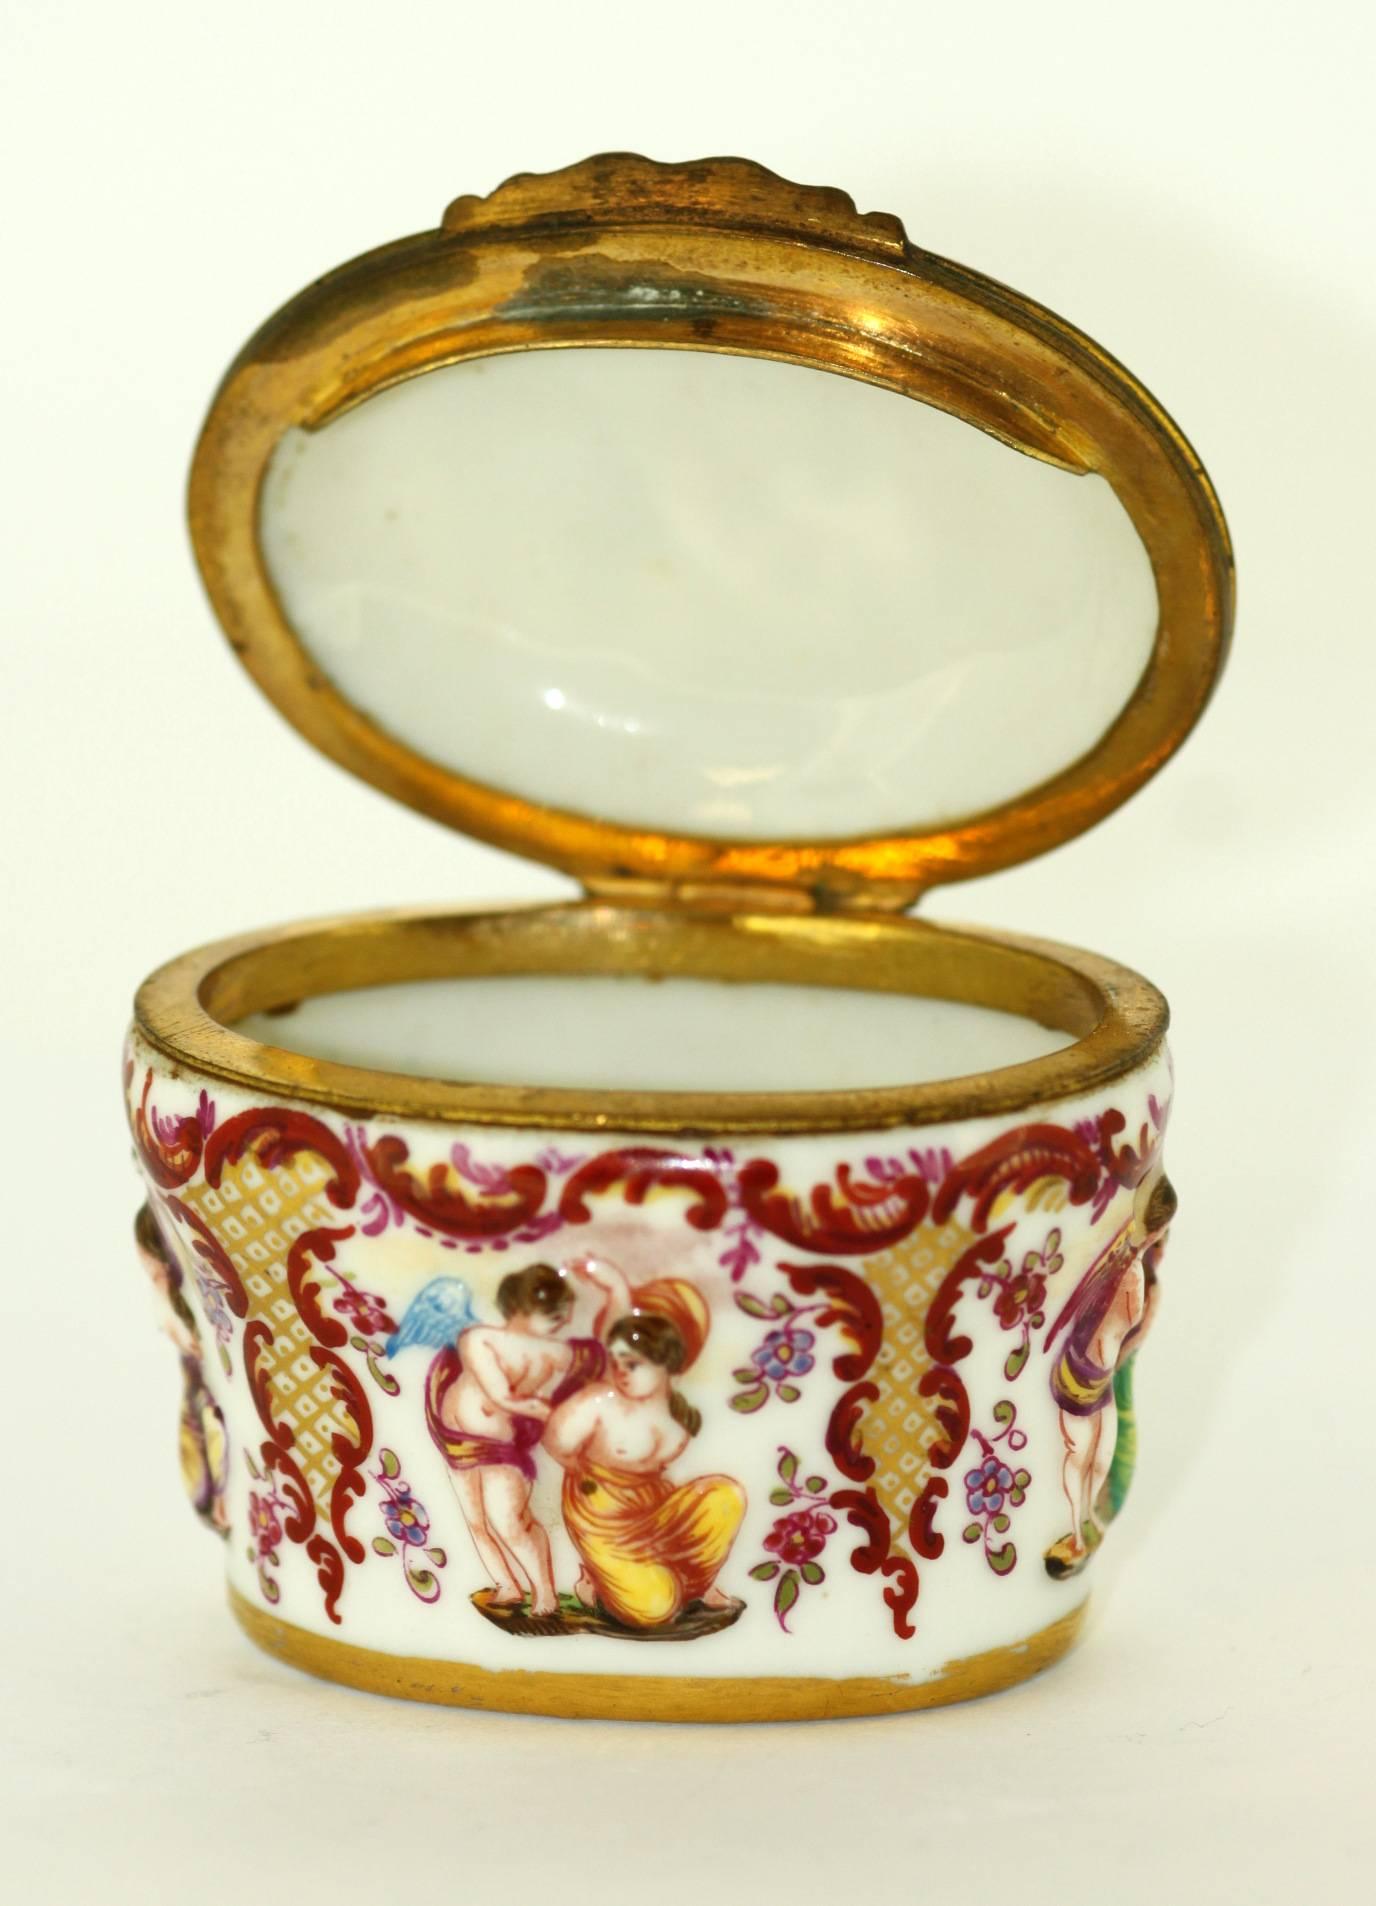 Late 19th Century Erotica Porcelain Jar With Lid By Carl Thieme of Potschappel, Germany, c. 1890s.